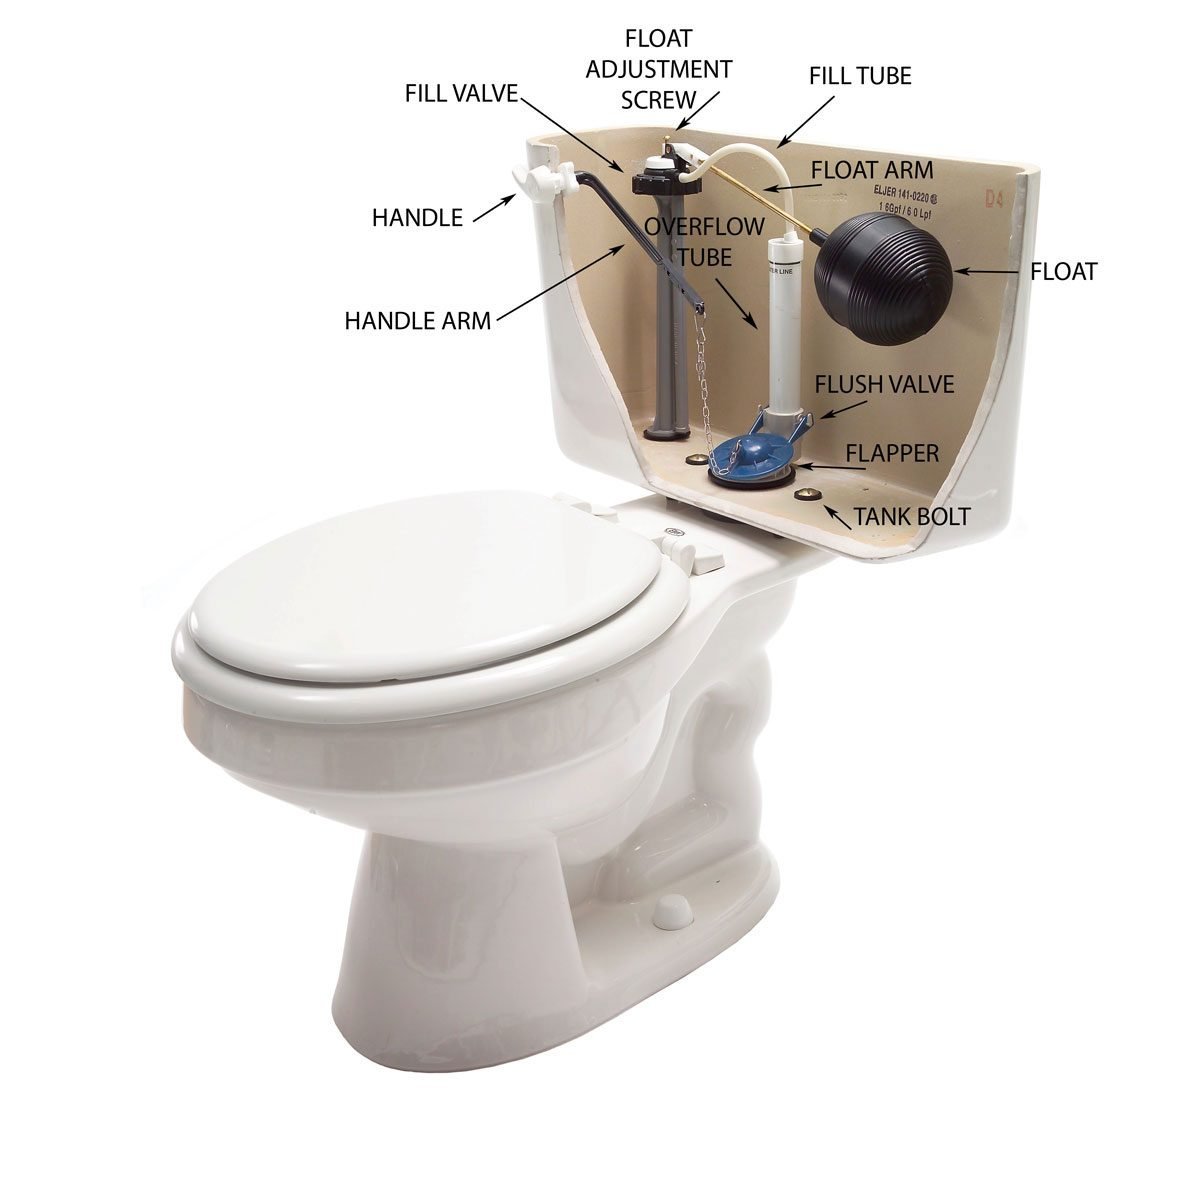 How to Remove a Toilet in 8 Steps—Without Calling a Plumber